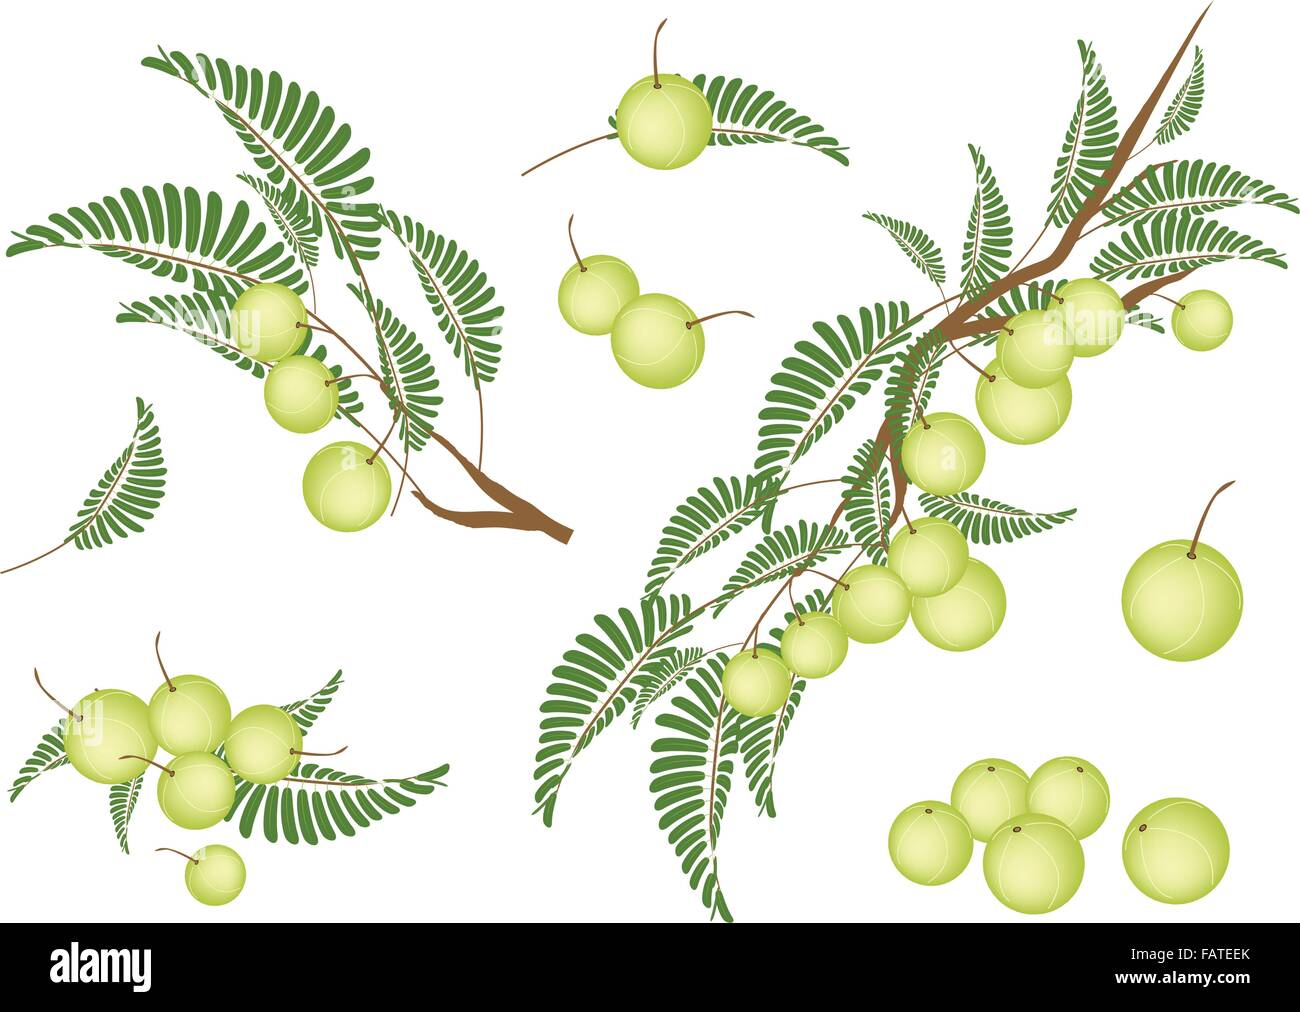 An Illustration Collection of Fresh Indian Gooseberry With Stem and Green Leaves Hanging on Tree Branch Stock Vector